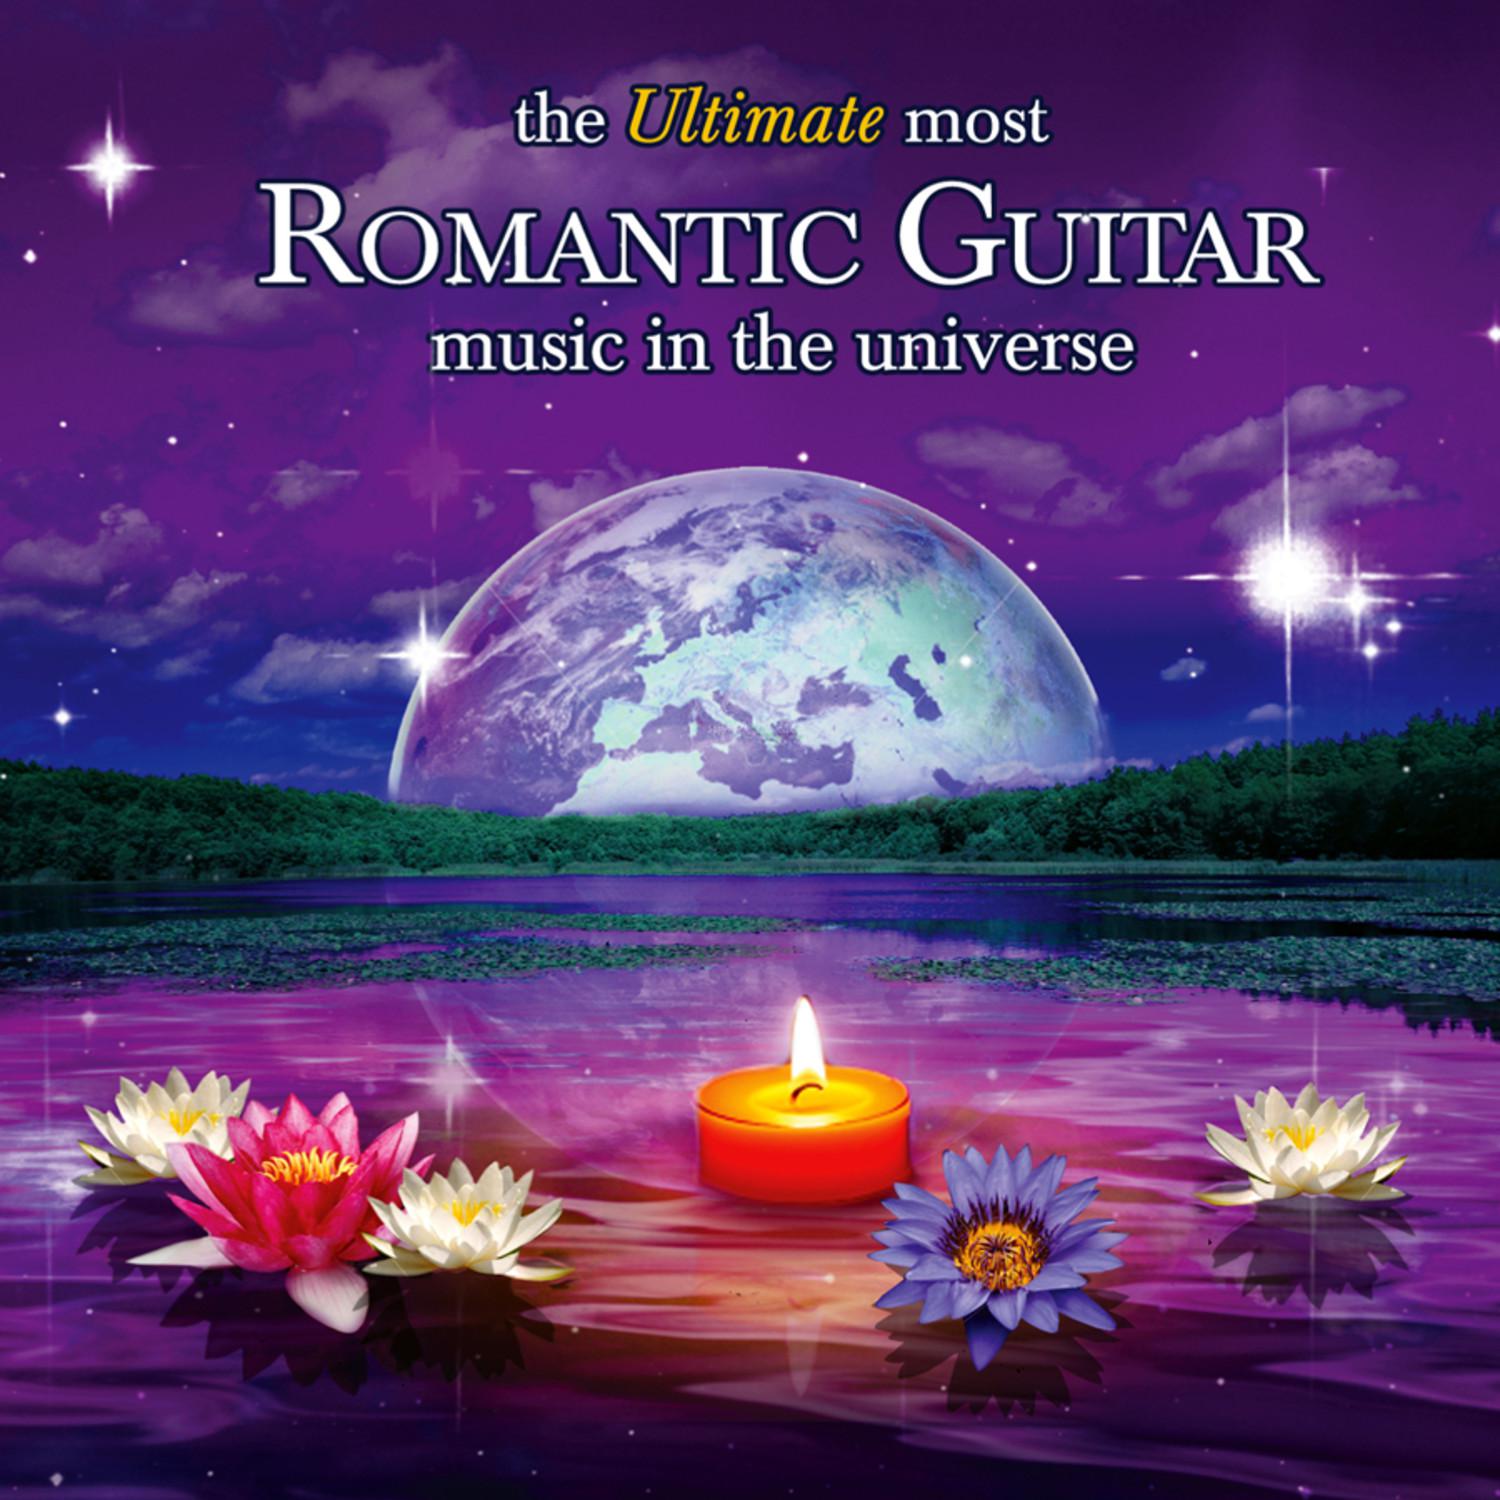 The Ultimate Most Romantic Guitar Music in the Universe